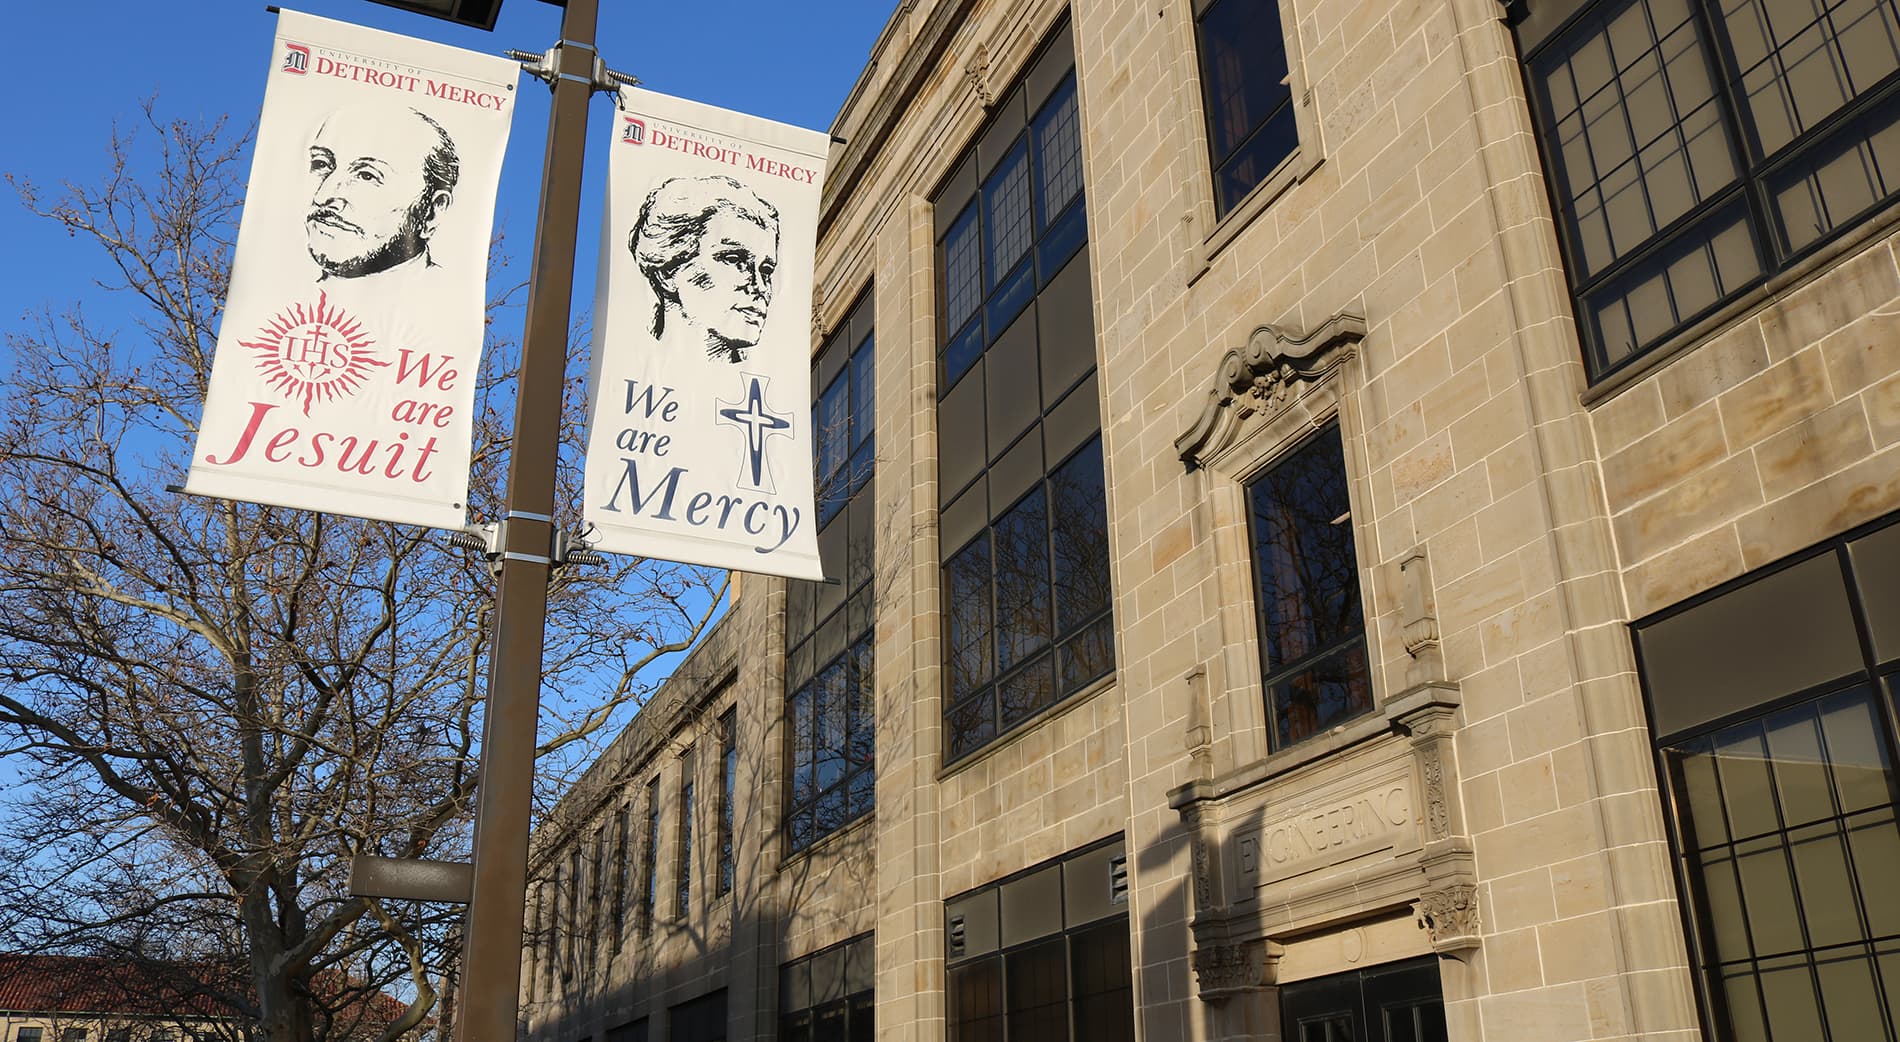 An exterior photo of the Engineering Building's side entrance, with We are Mercy and We are Jesuit light pole banners visible.